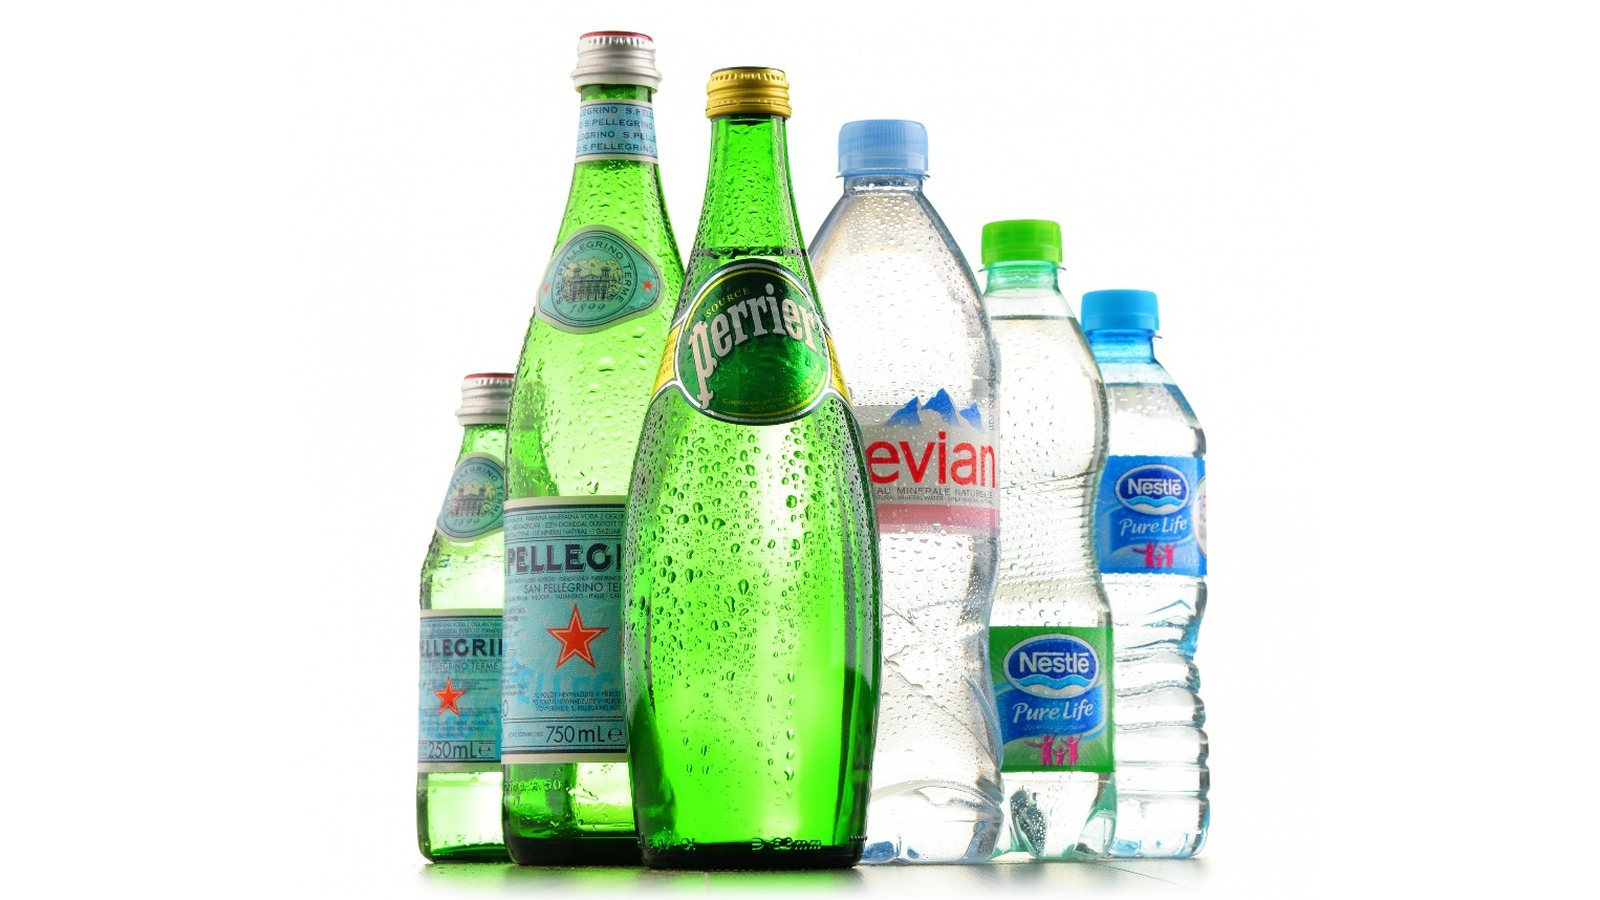 https://www.thedailymeal.com/img/gallery/the-complete-list-of-sparkling-water-brands-ranked/l-intro-1685014167.jpg